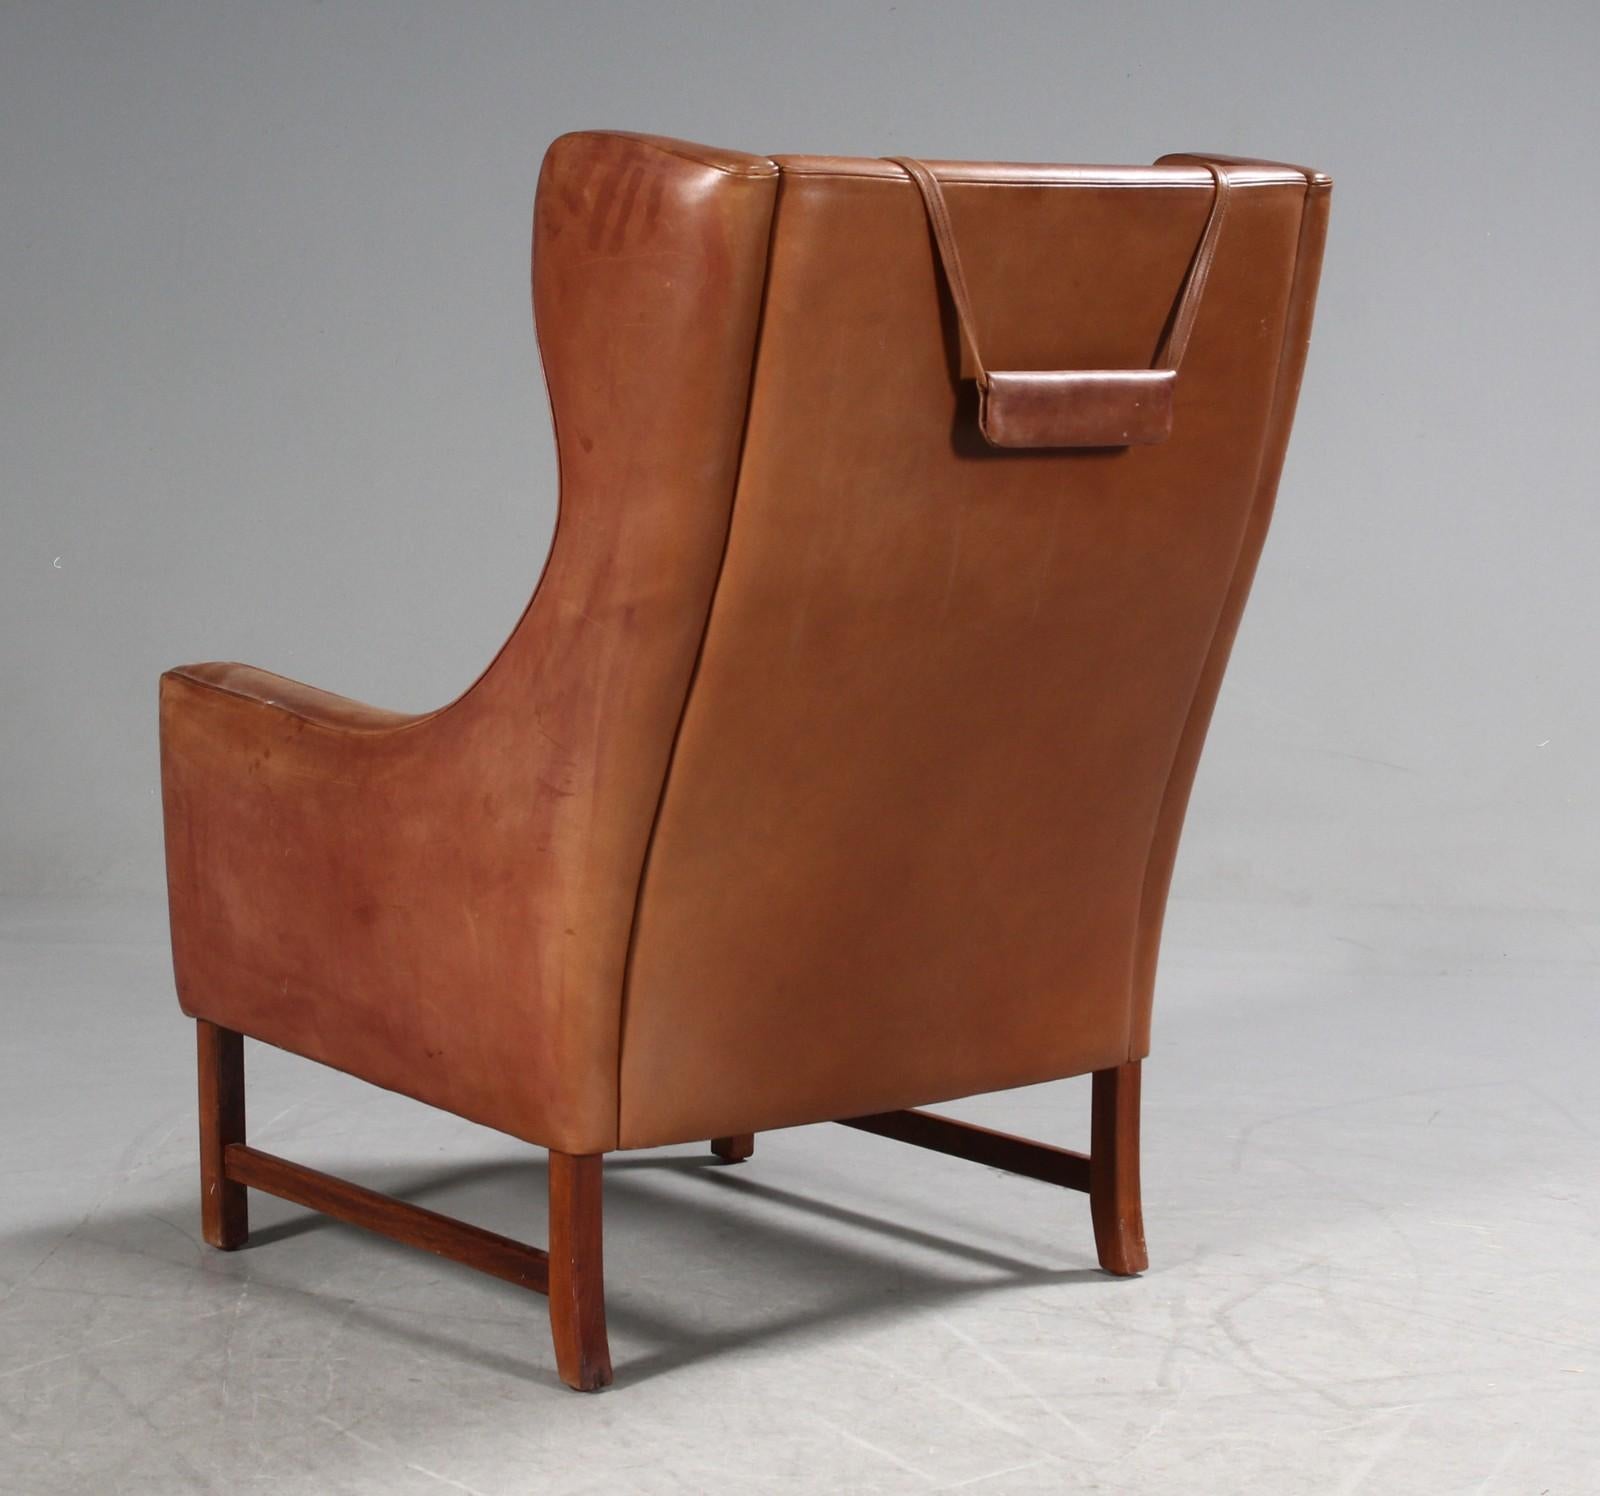 Frederik A. Kayser Wingback Chair Upholstered in Cognac-Ccolored Leather In Fair Condition For Sale In Vienna, AT